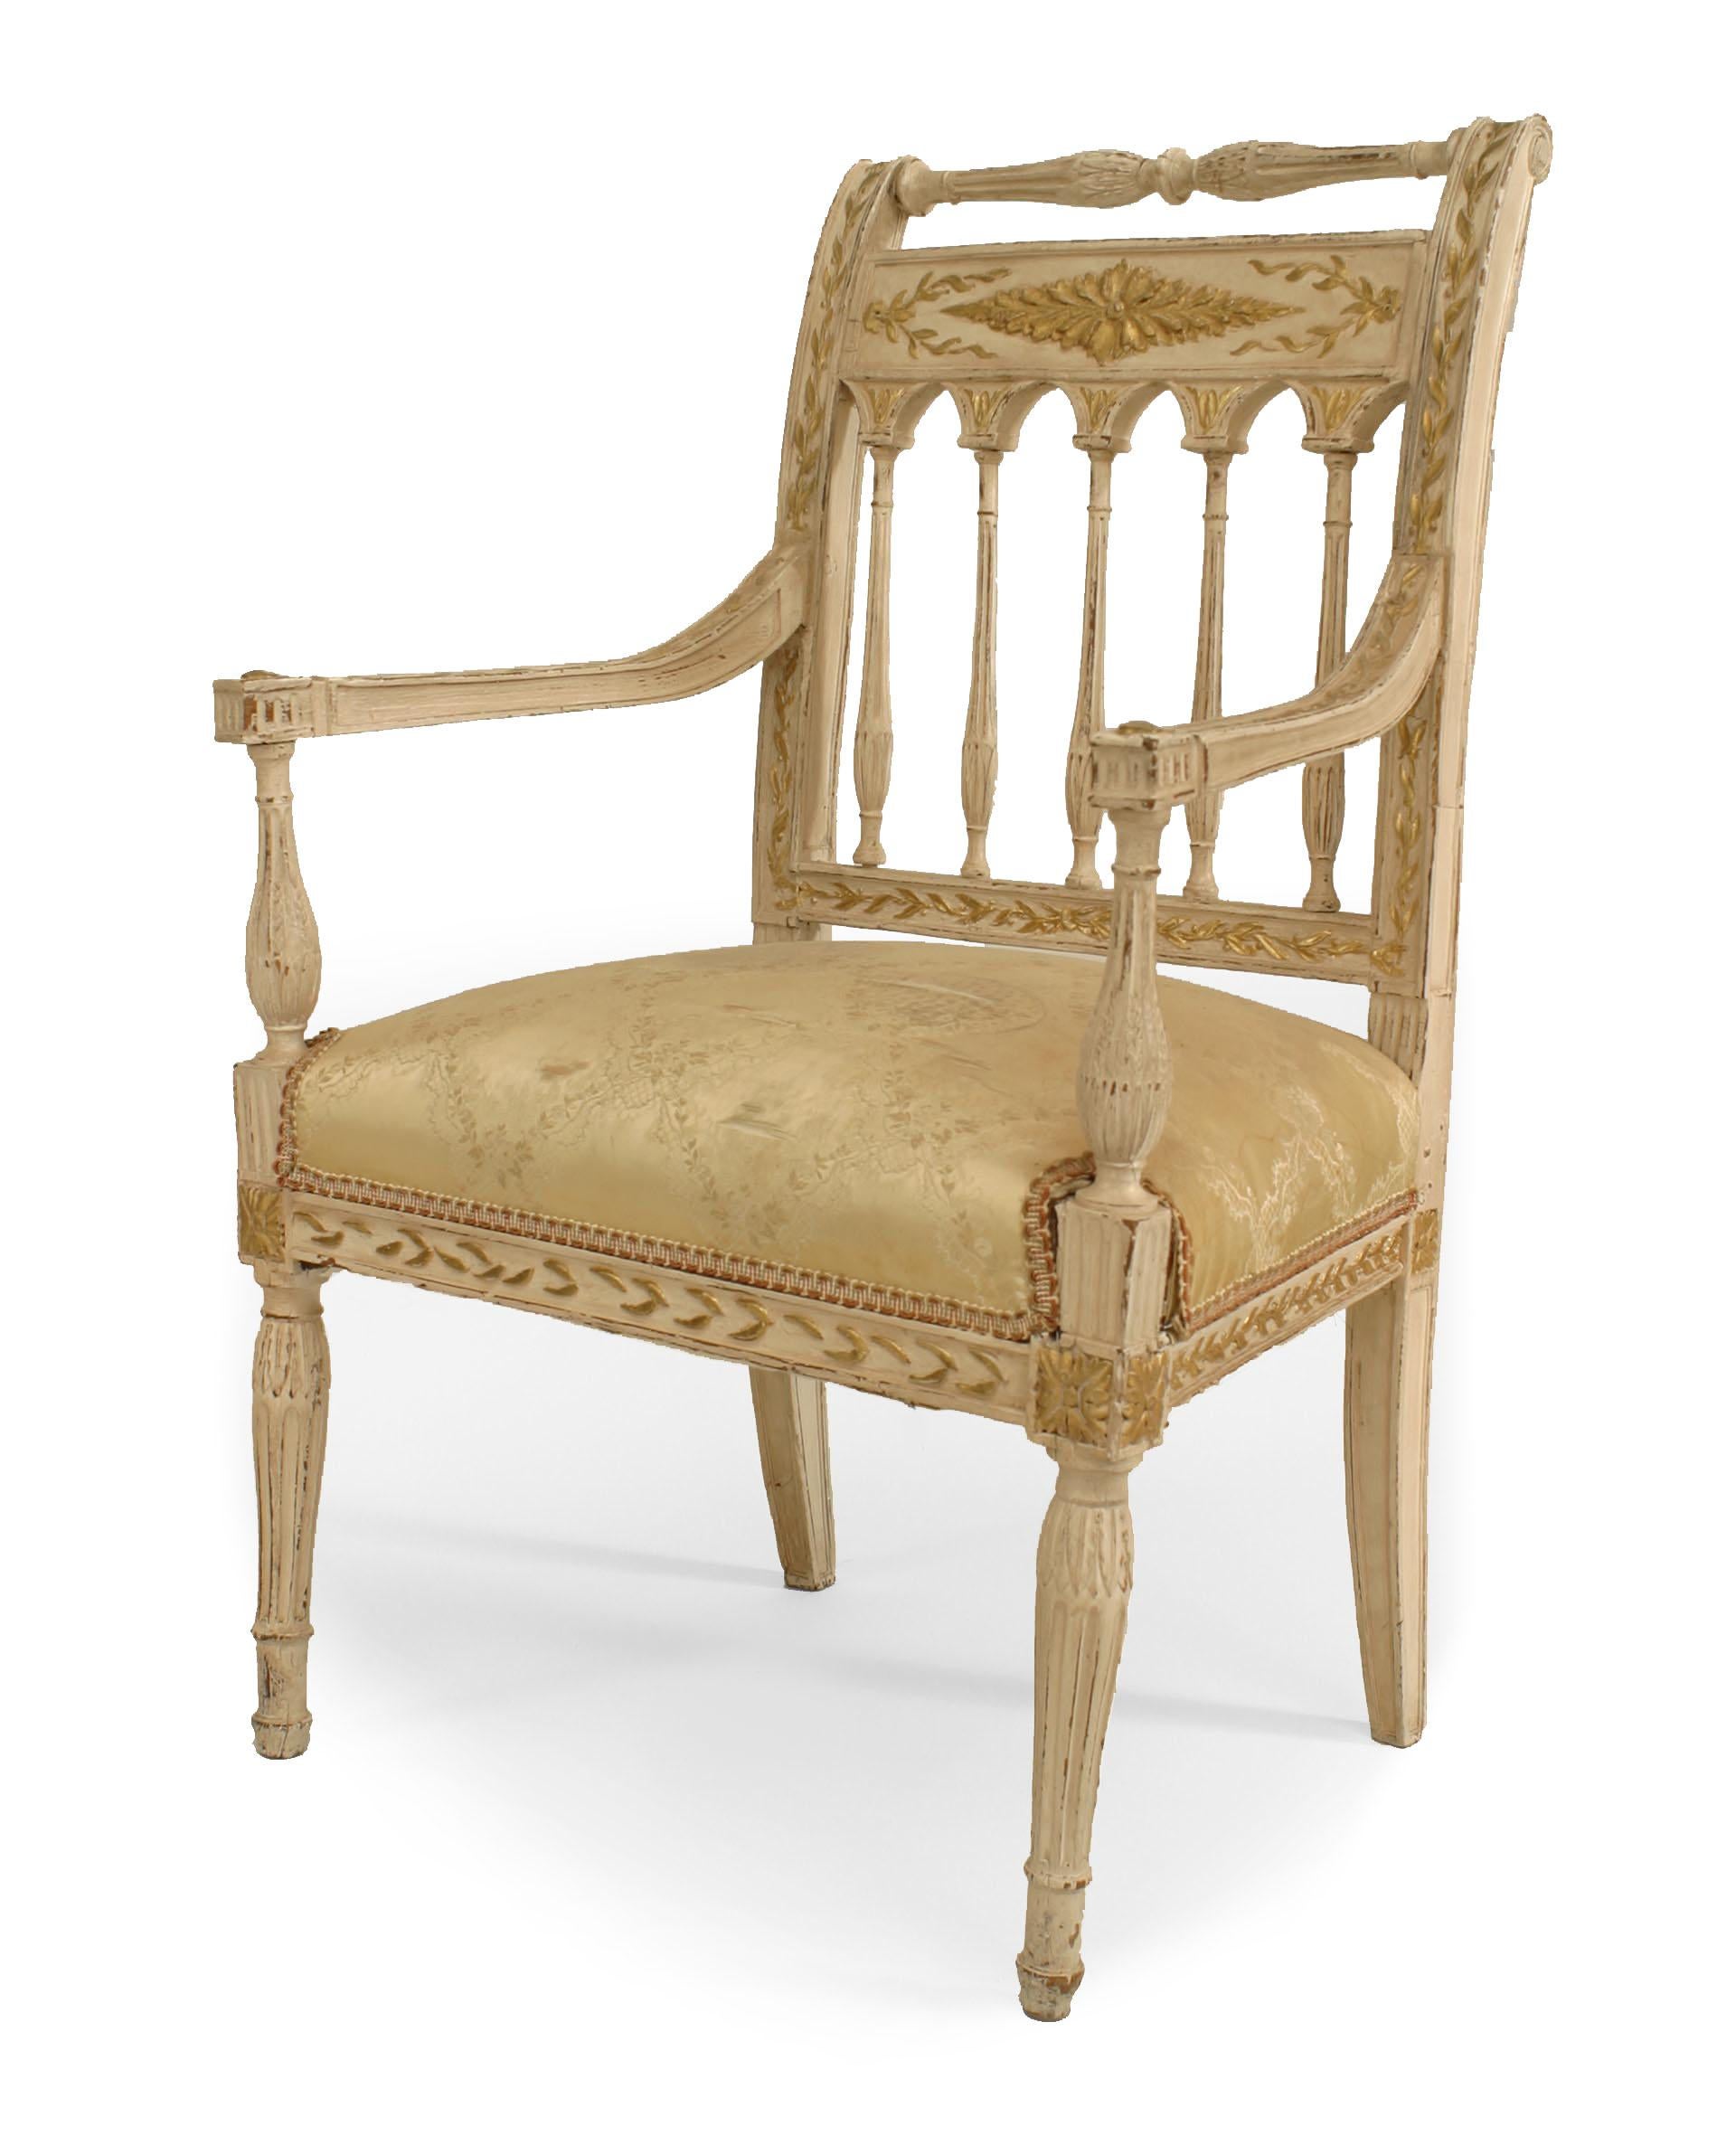 Wood 19th Century French Directoire Style Gilt Arm Chair For Sale